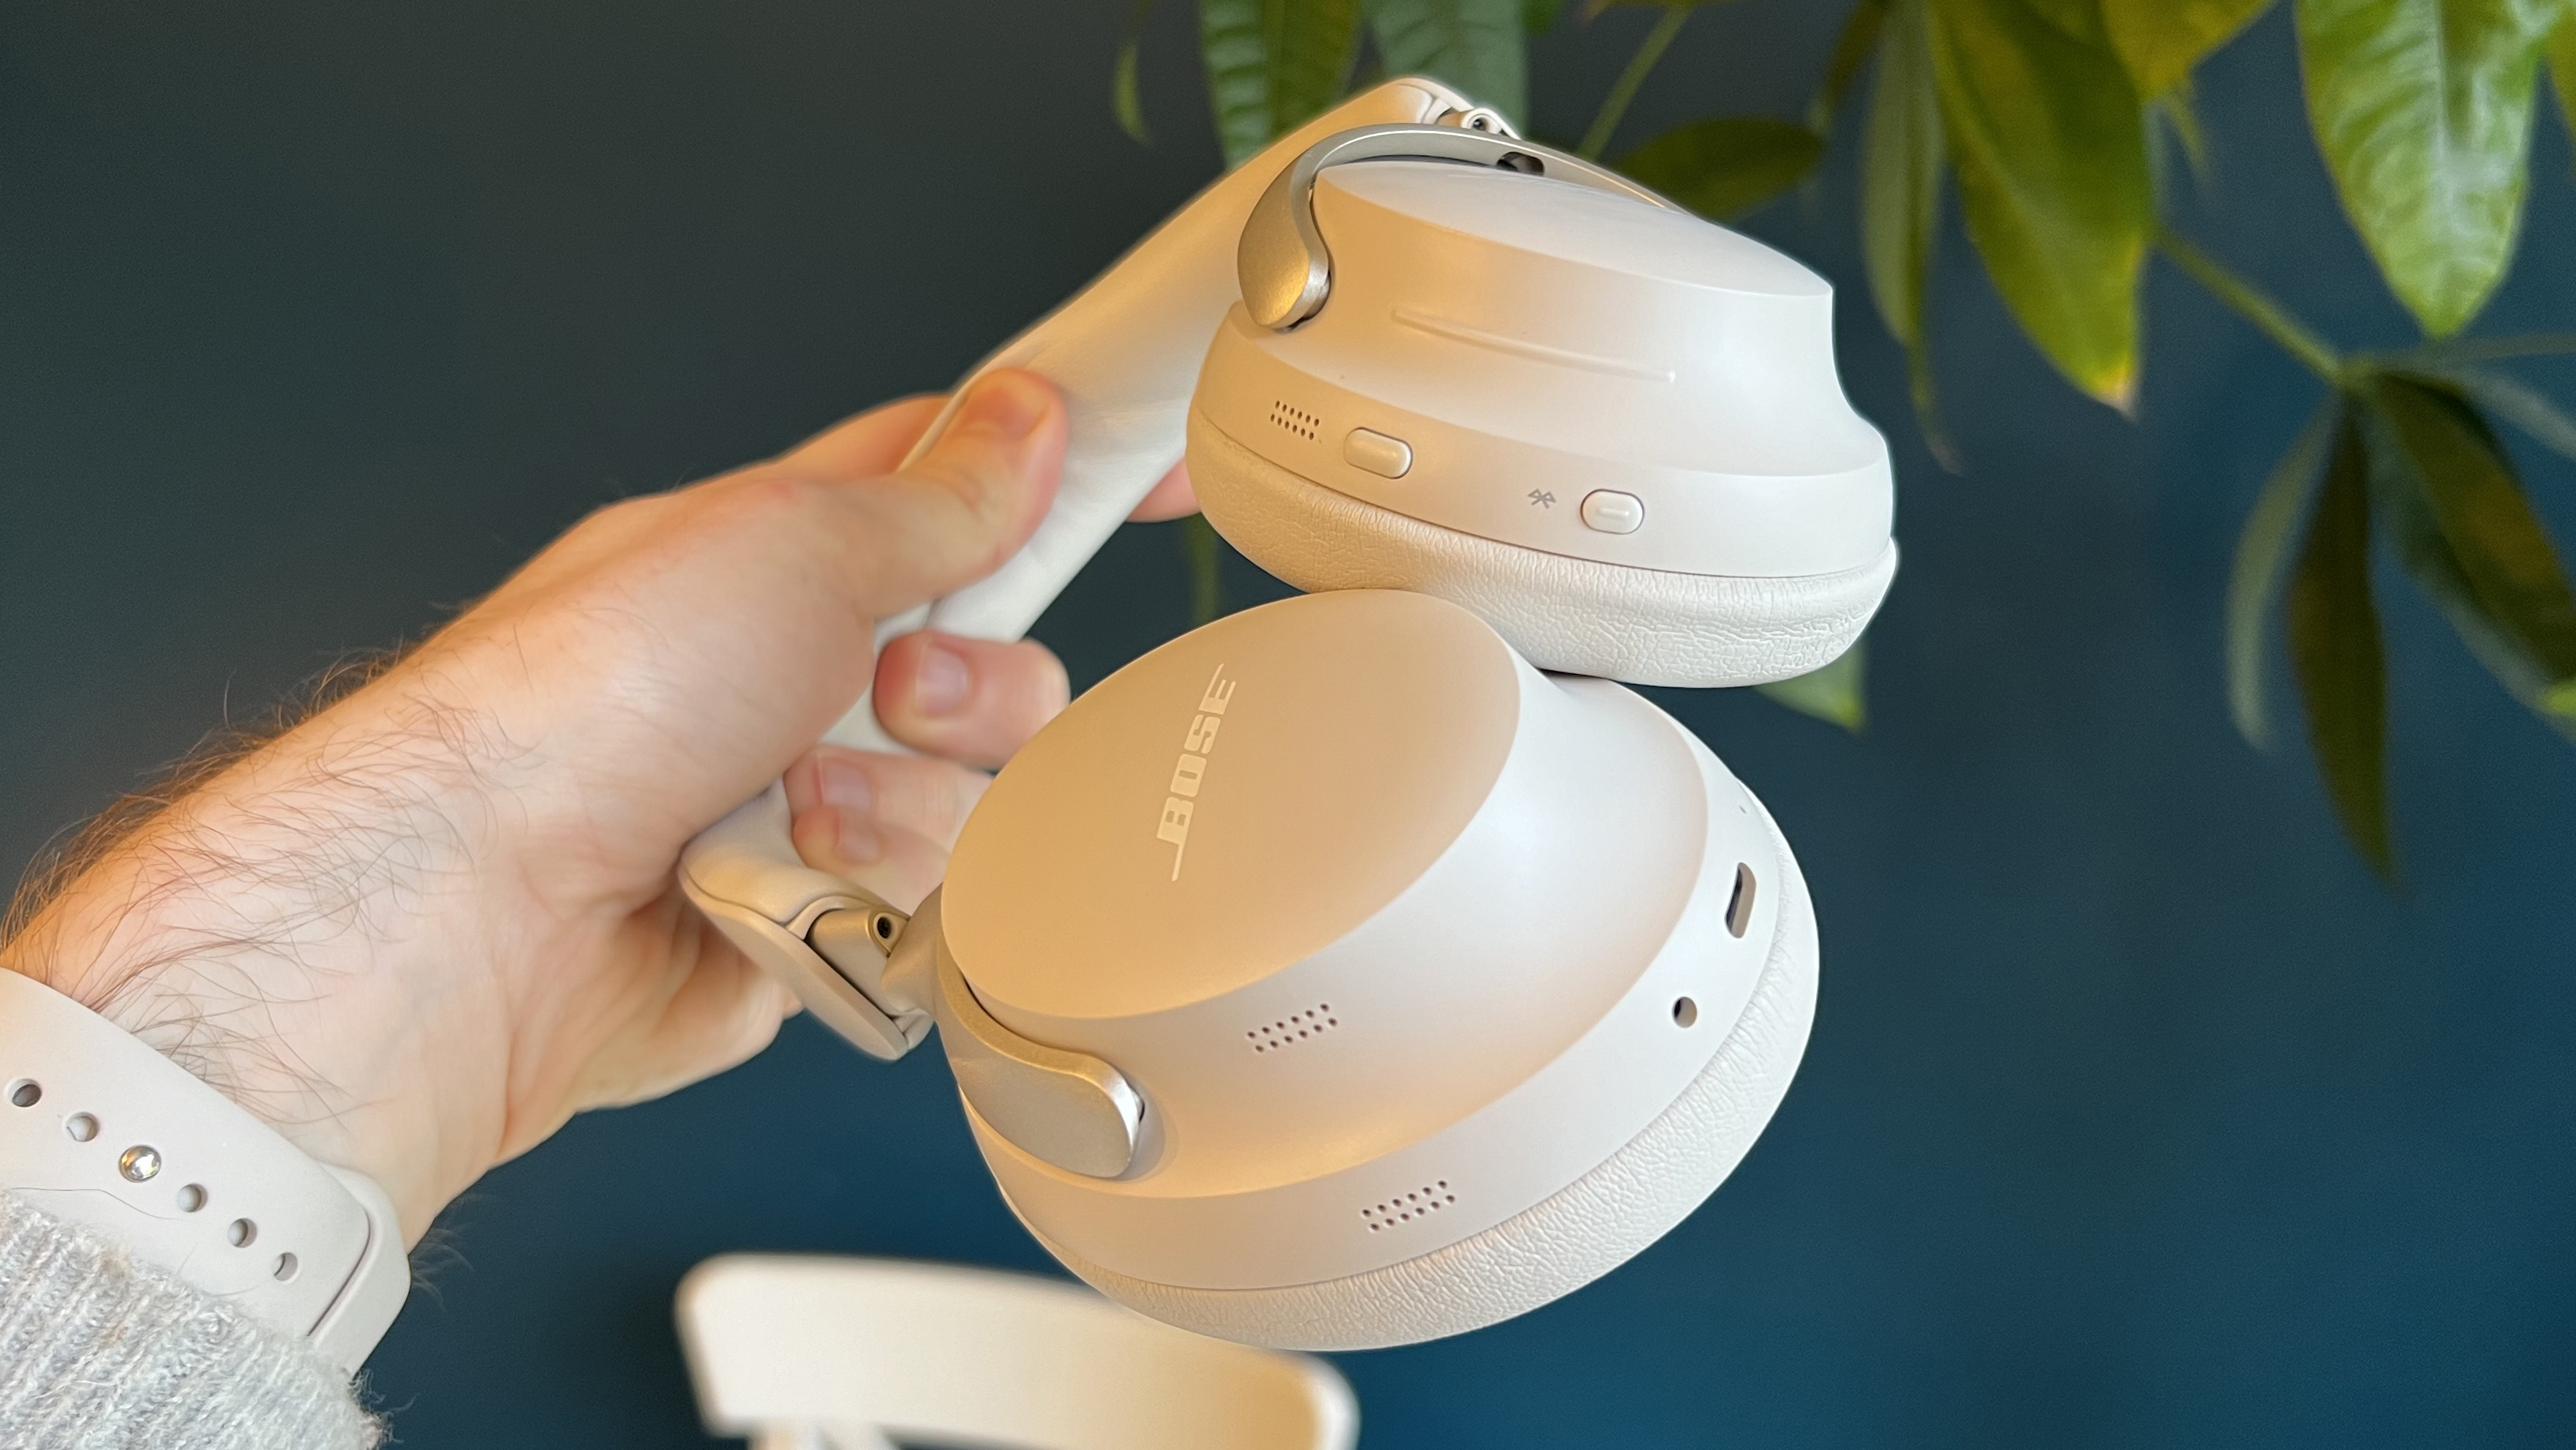 Bose QuietComfort Ultra Headphones showing the ports and buttons